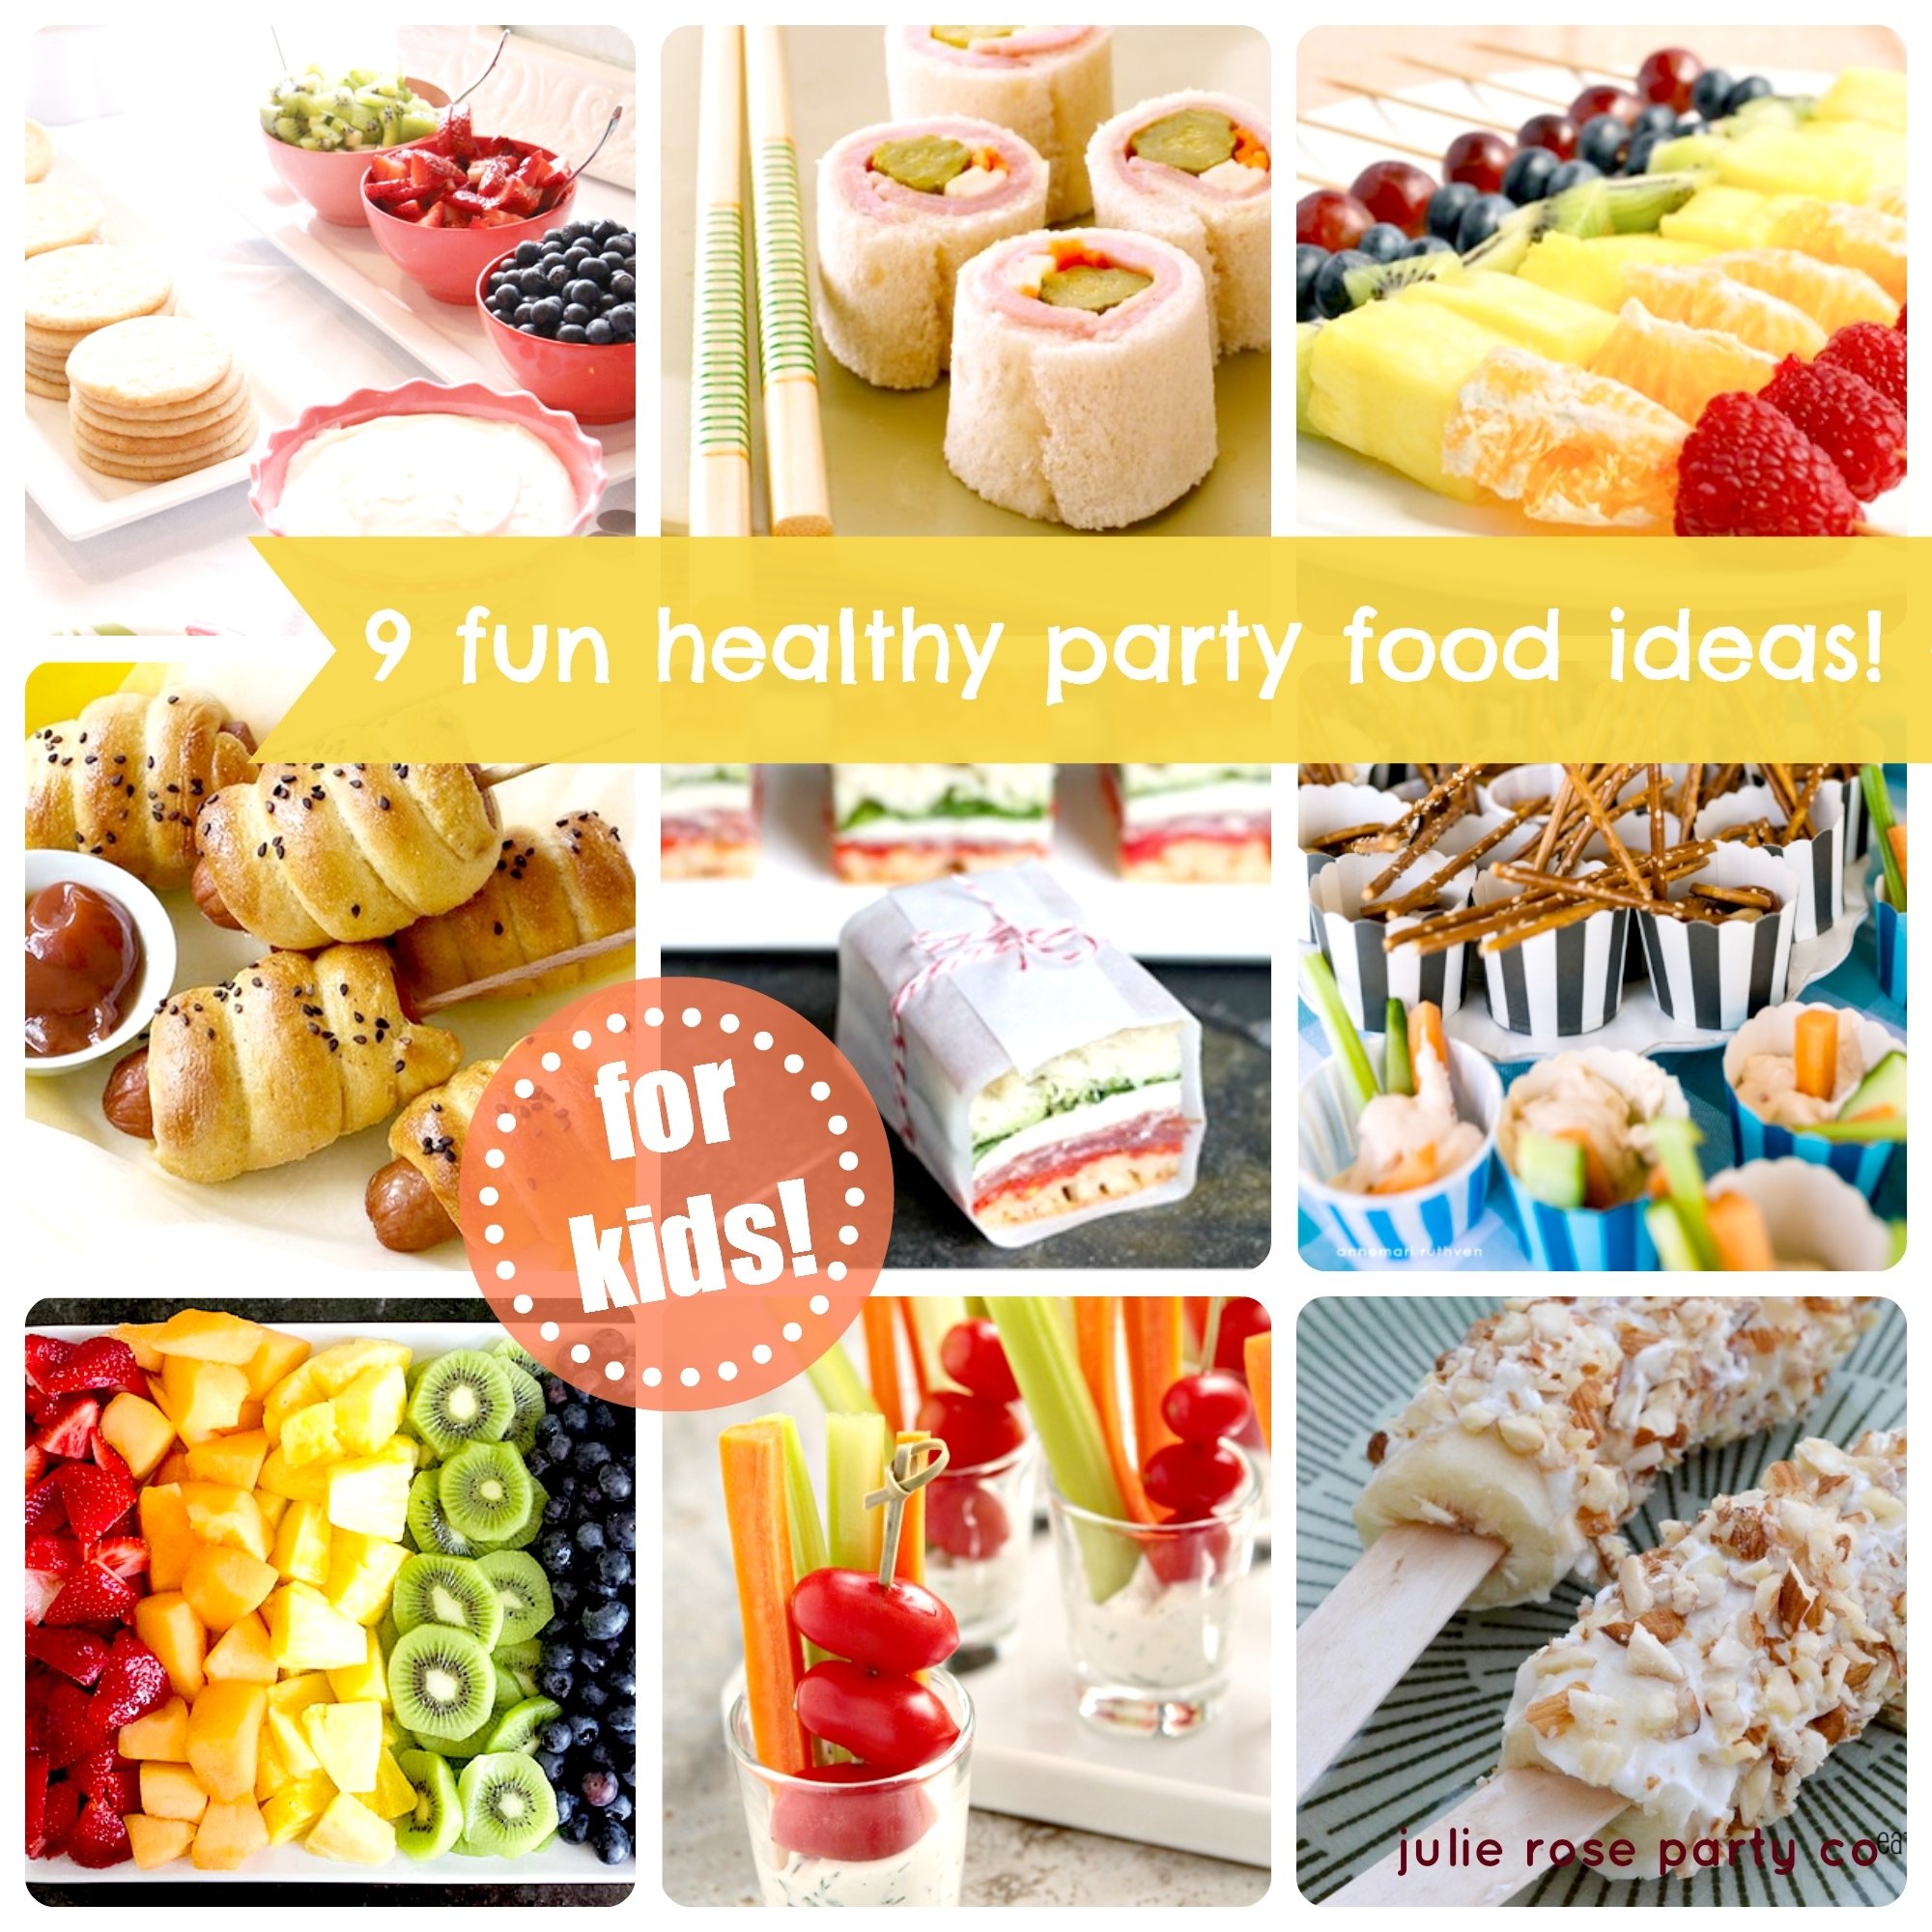 10 Stunning Easy Food Ideas For Parties 9 fun and healthy party food ideas kids julie rose party co 2023